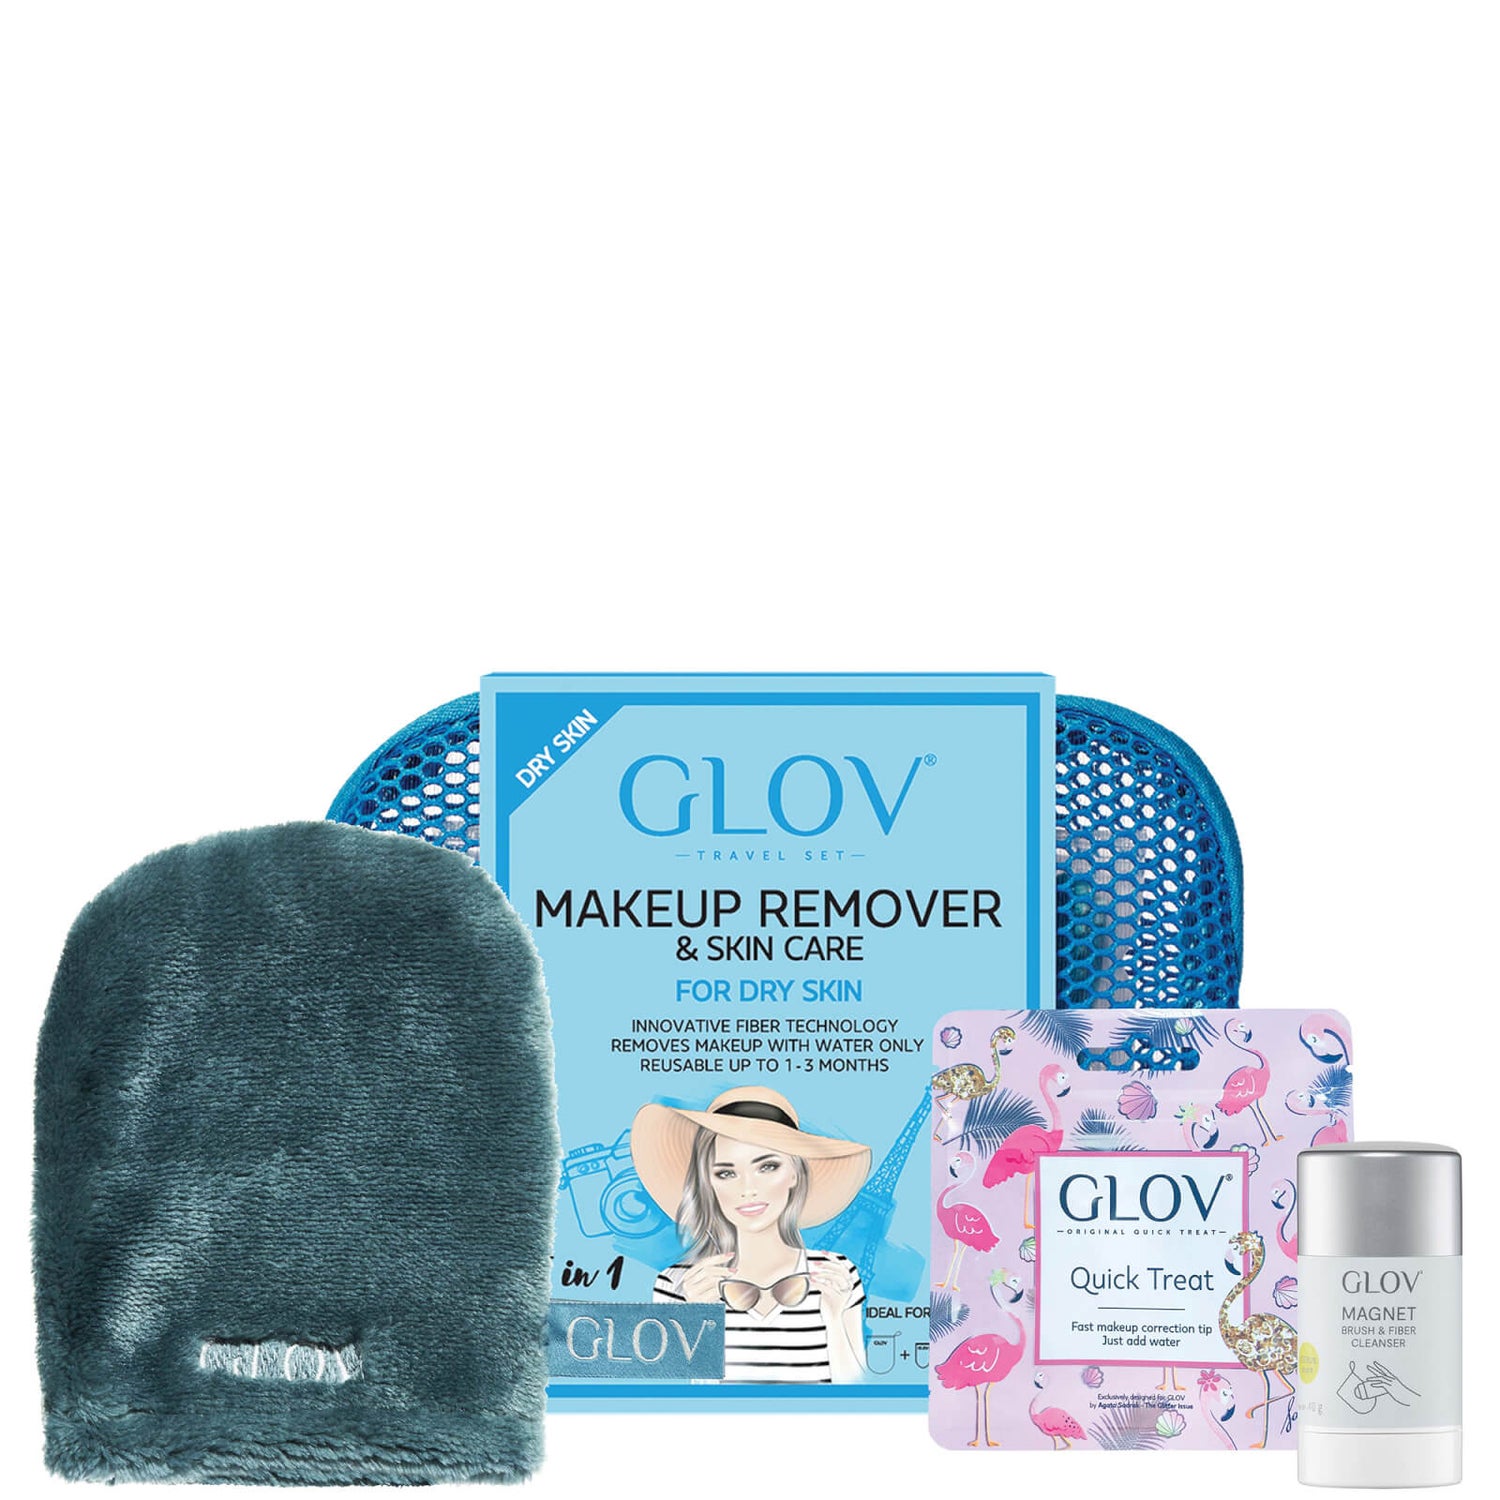 GLOV® Blue Water-Only Makeup Removing Mitt for Dry Skin with Fiber Soap Set